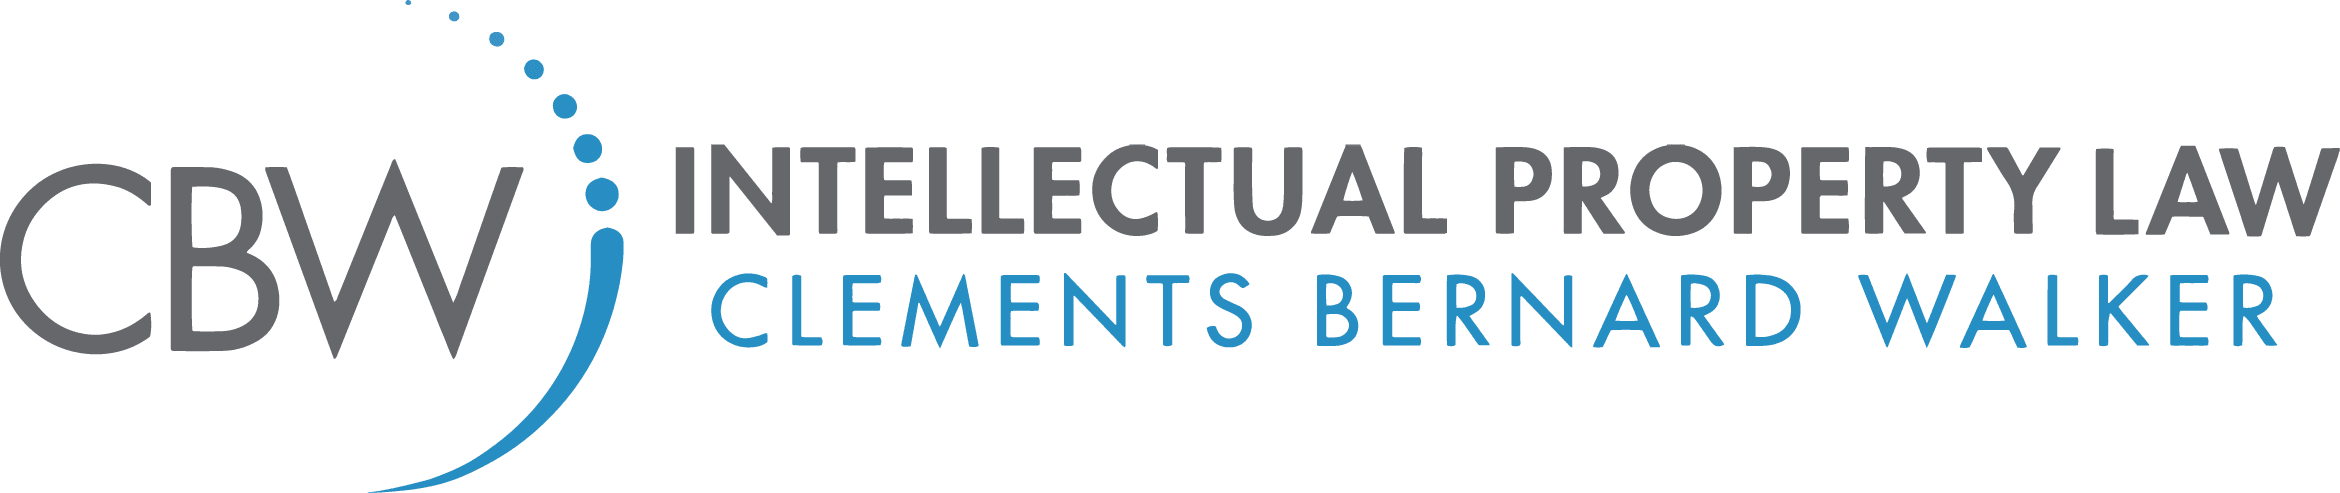 Clements Bernard Walker Patent Attorneys at Law